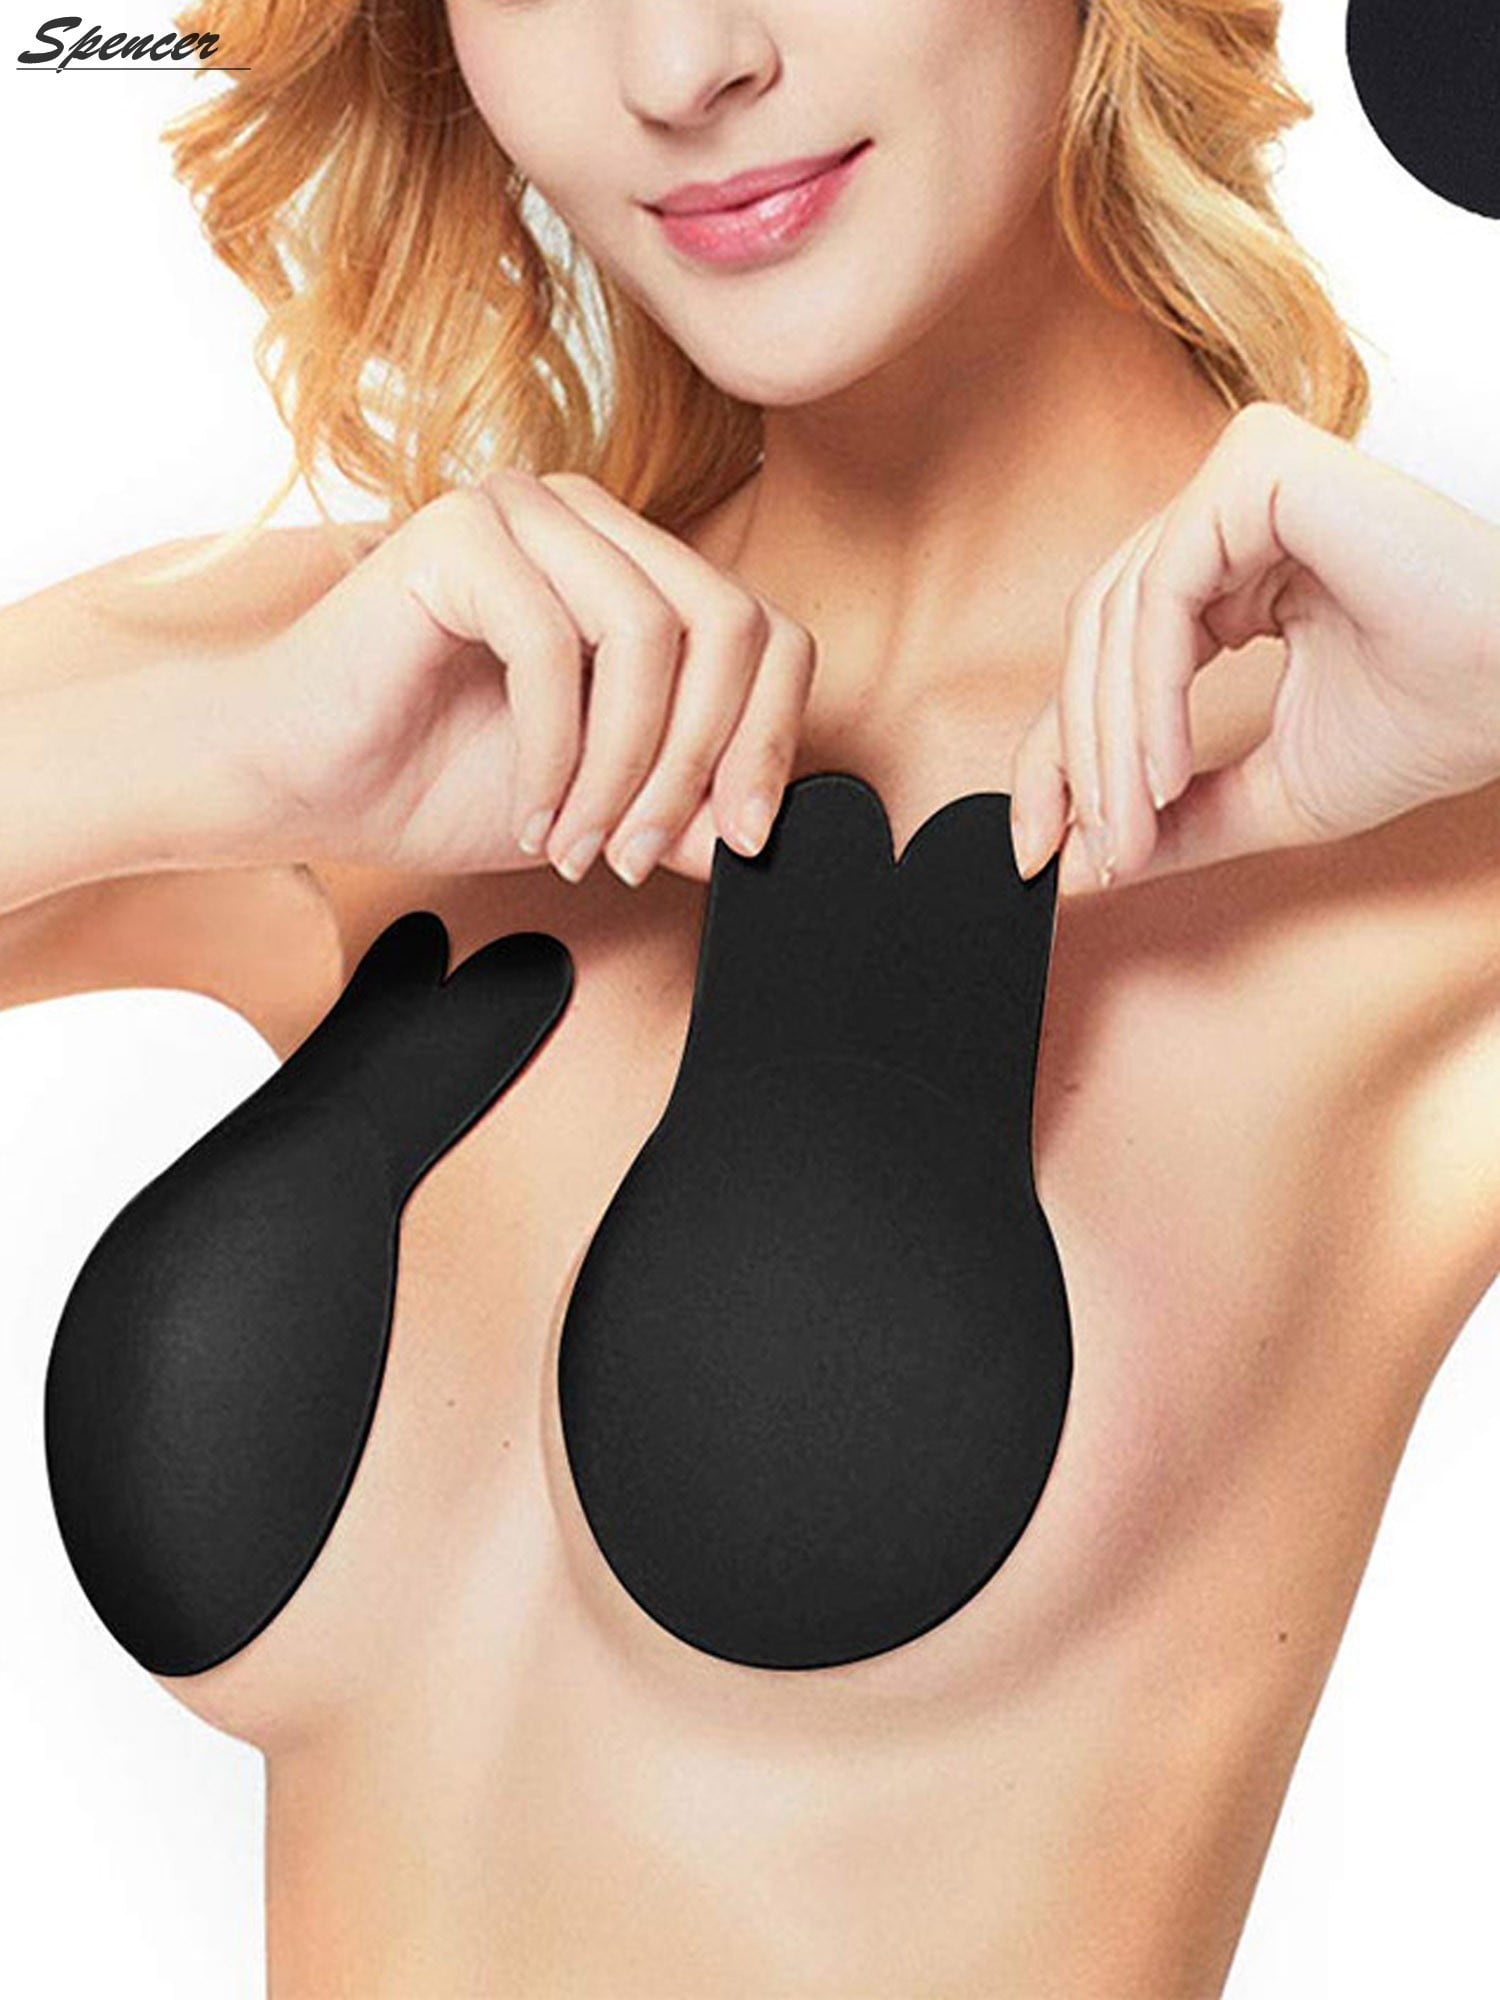 Womens Adhesive Lift Bra 4.33 Inch Large Adhesive Bra Washable /& Reusable Invisible Backless Nipplecovers